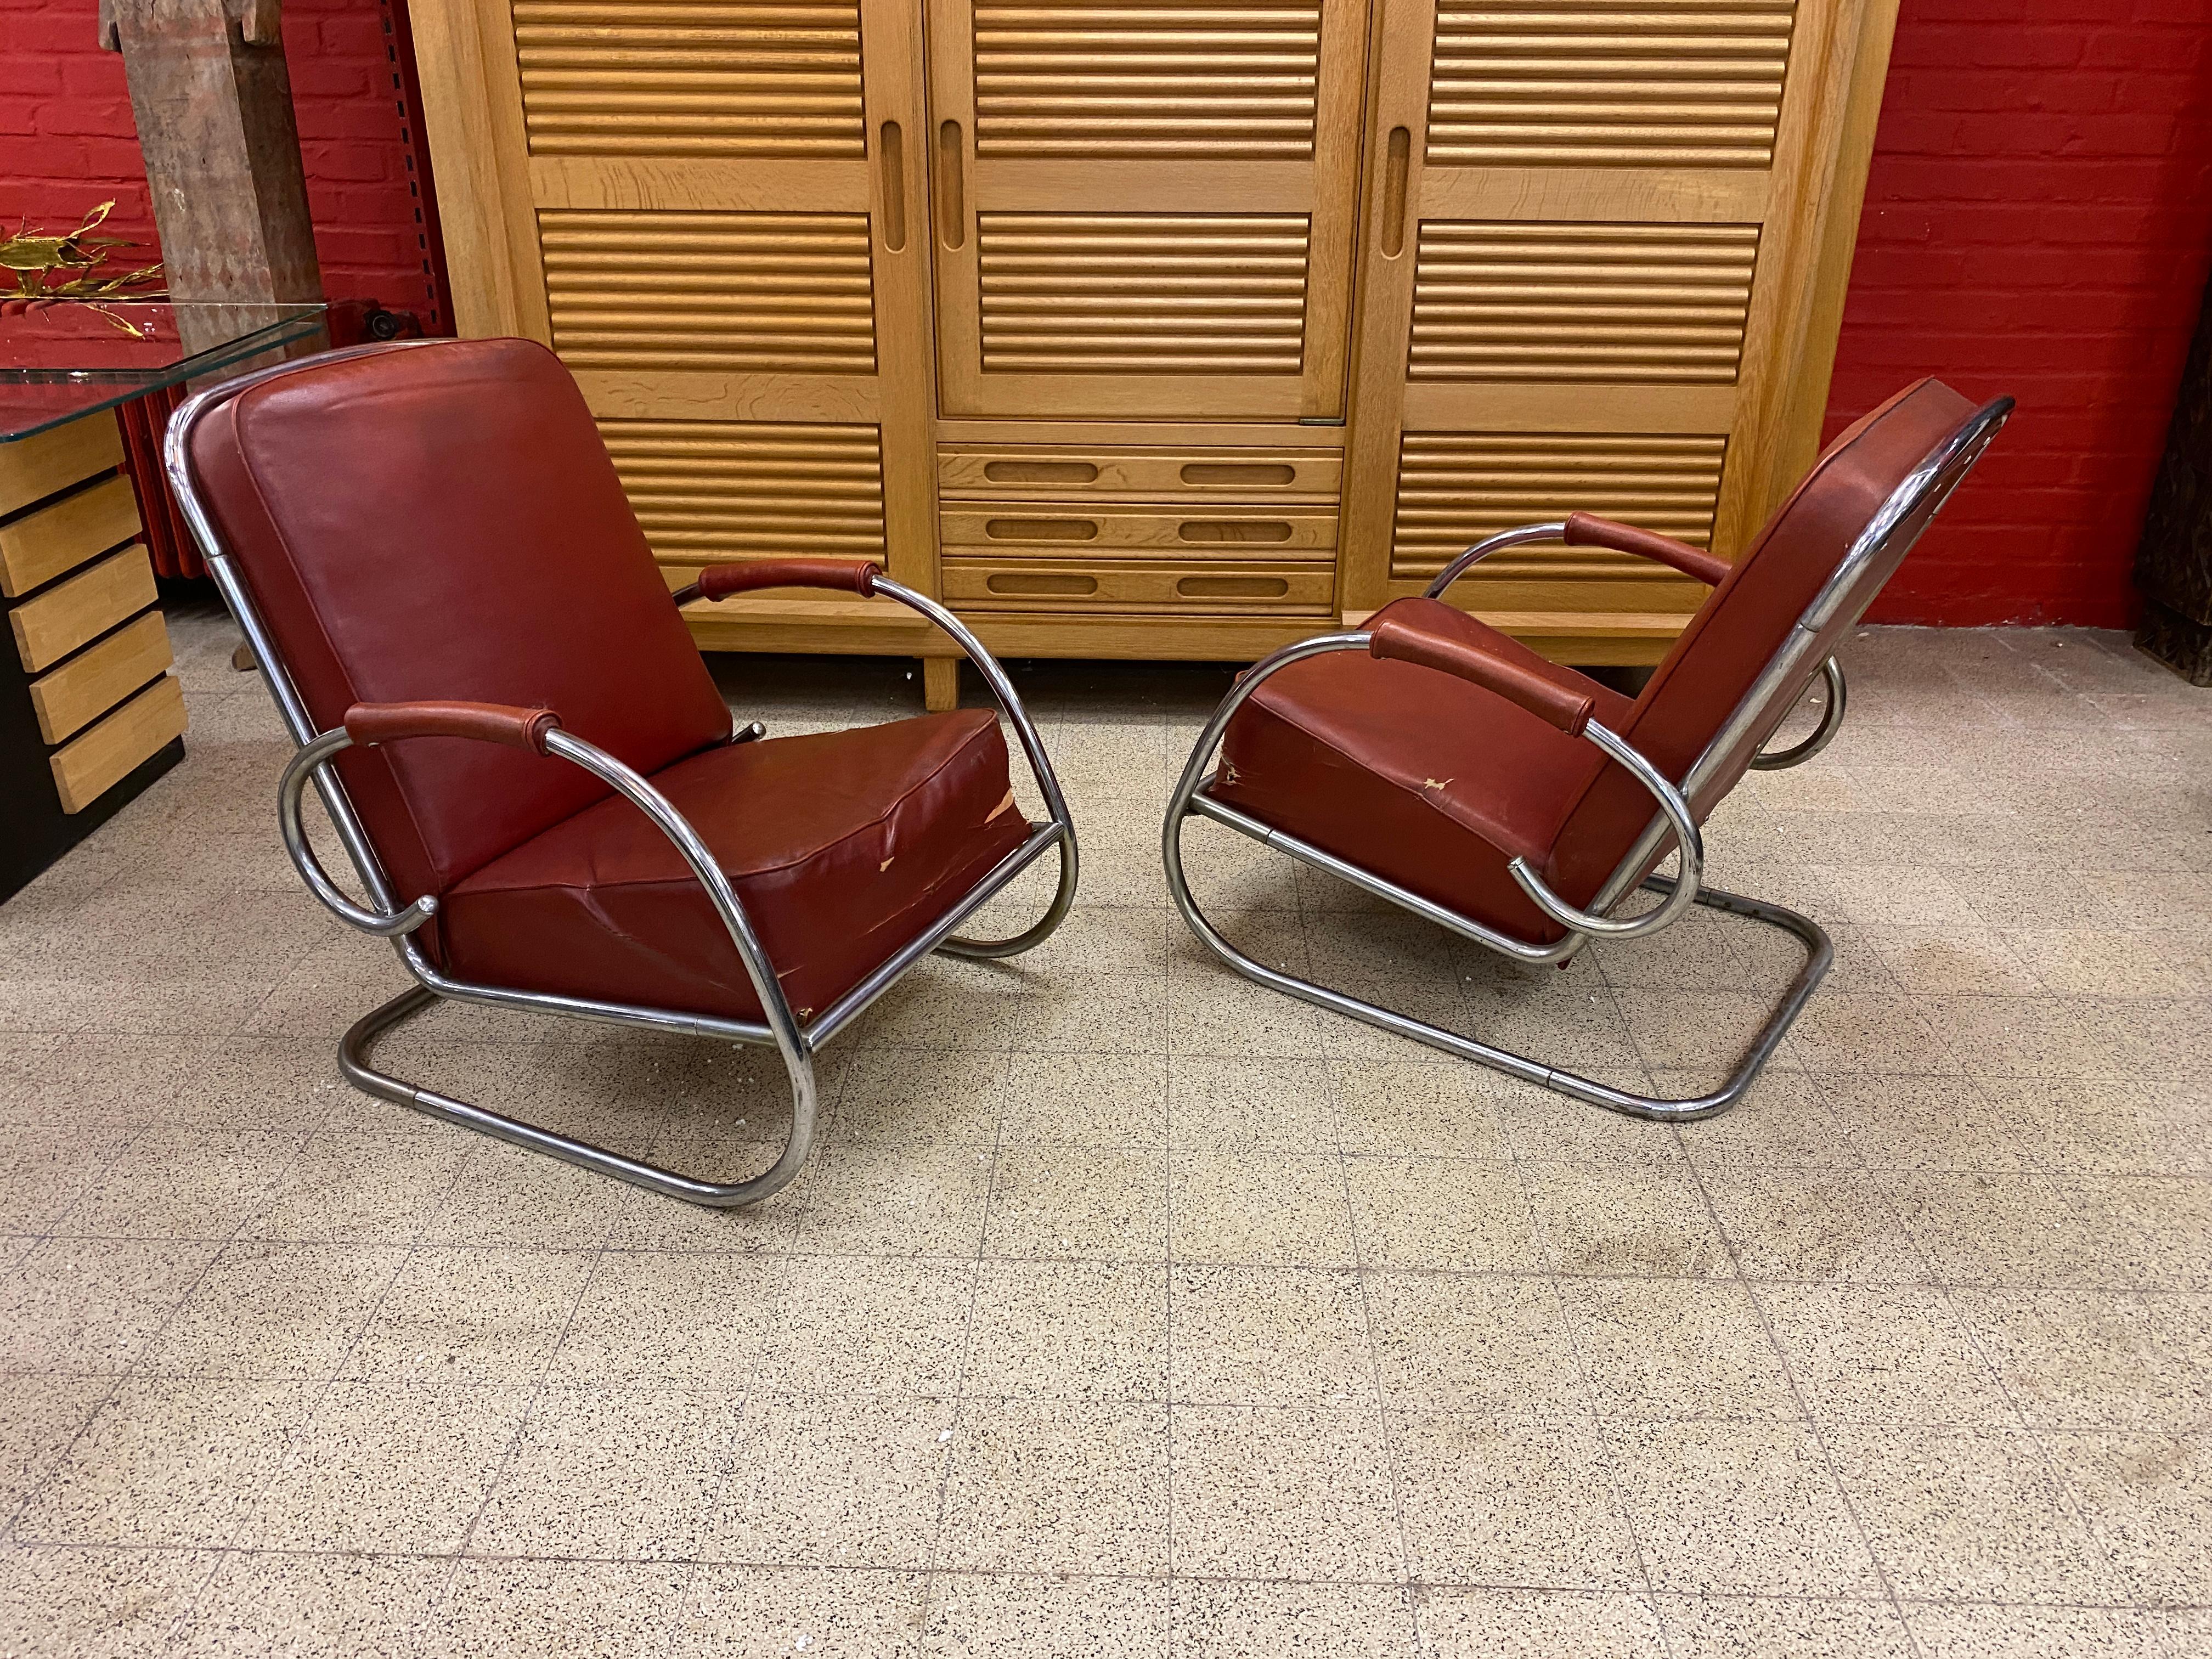 Early 20th Century 2 Modernist Art Deco Armchairs in Chromed Metal and Faux Leather circa 1920-1930 For Sale